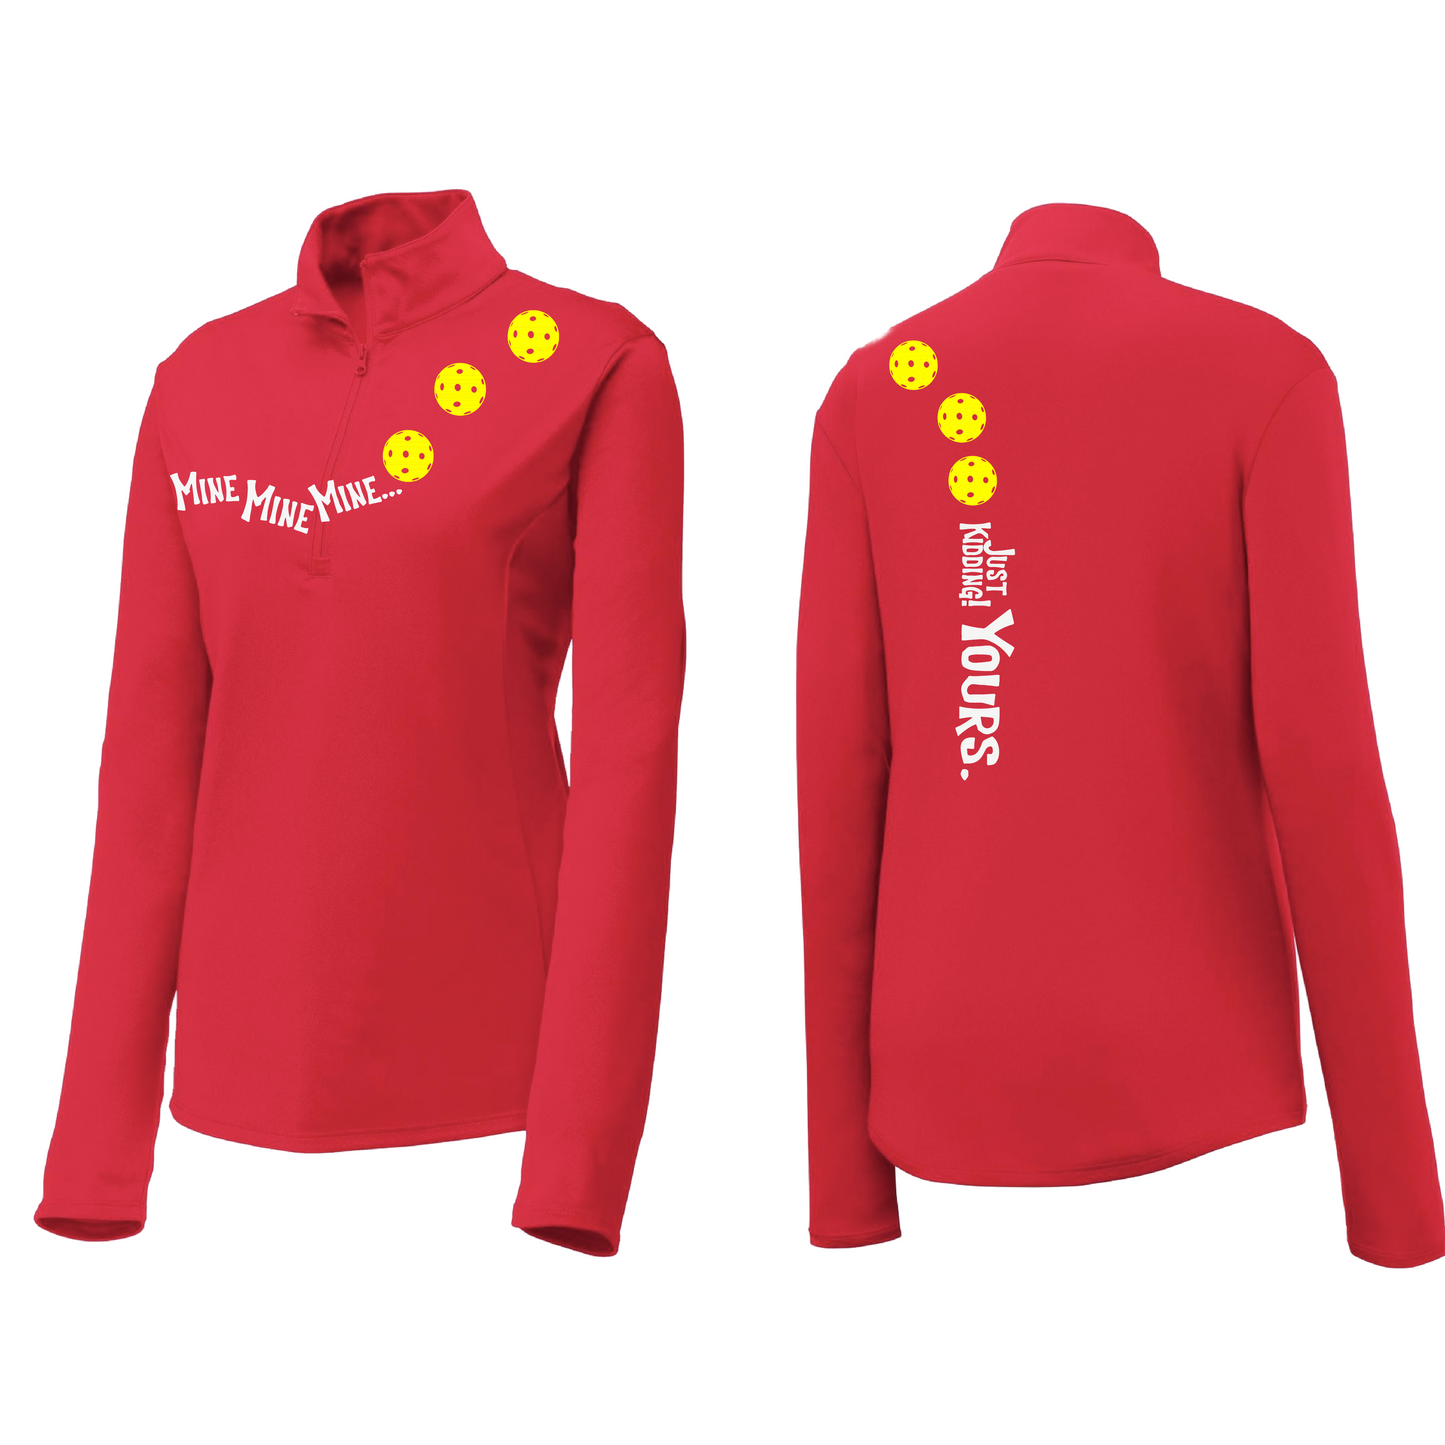 Mine JK Yours (Pickleball Colors Orange Yellow or Red) | Women's 1/4 Zip Pickleball Pullover | 100% Polyester